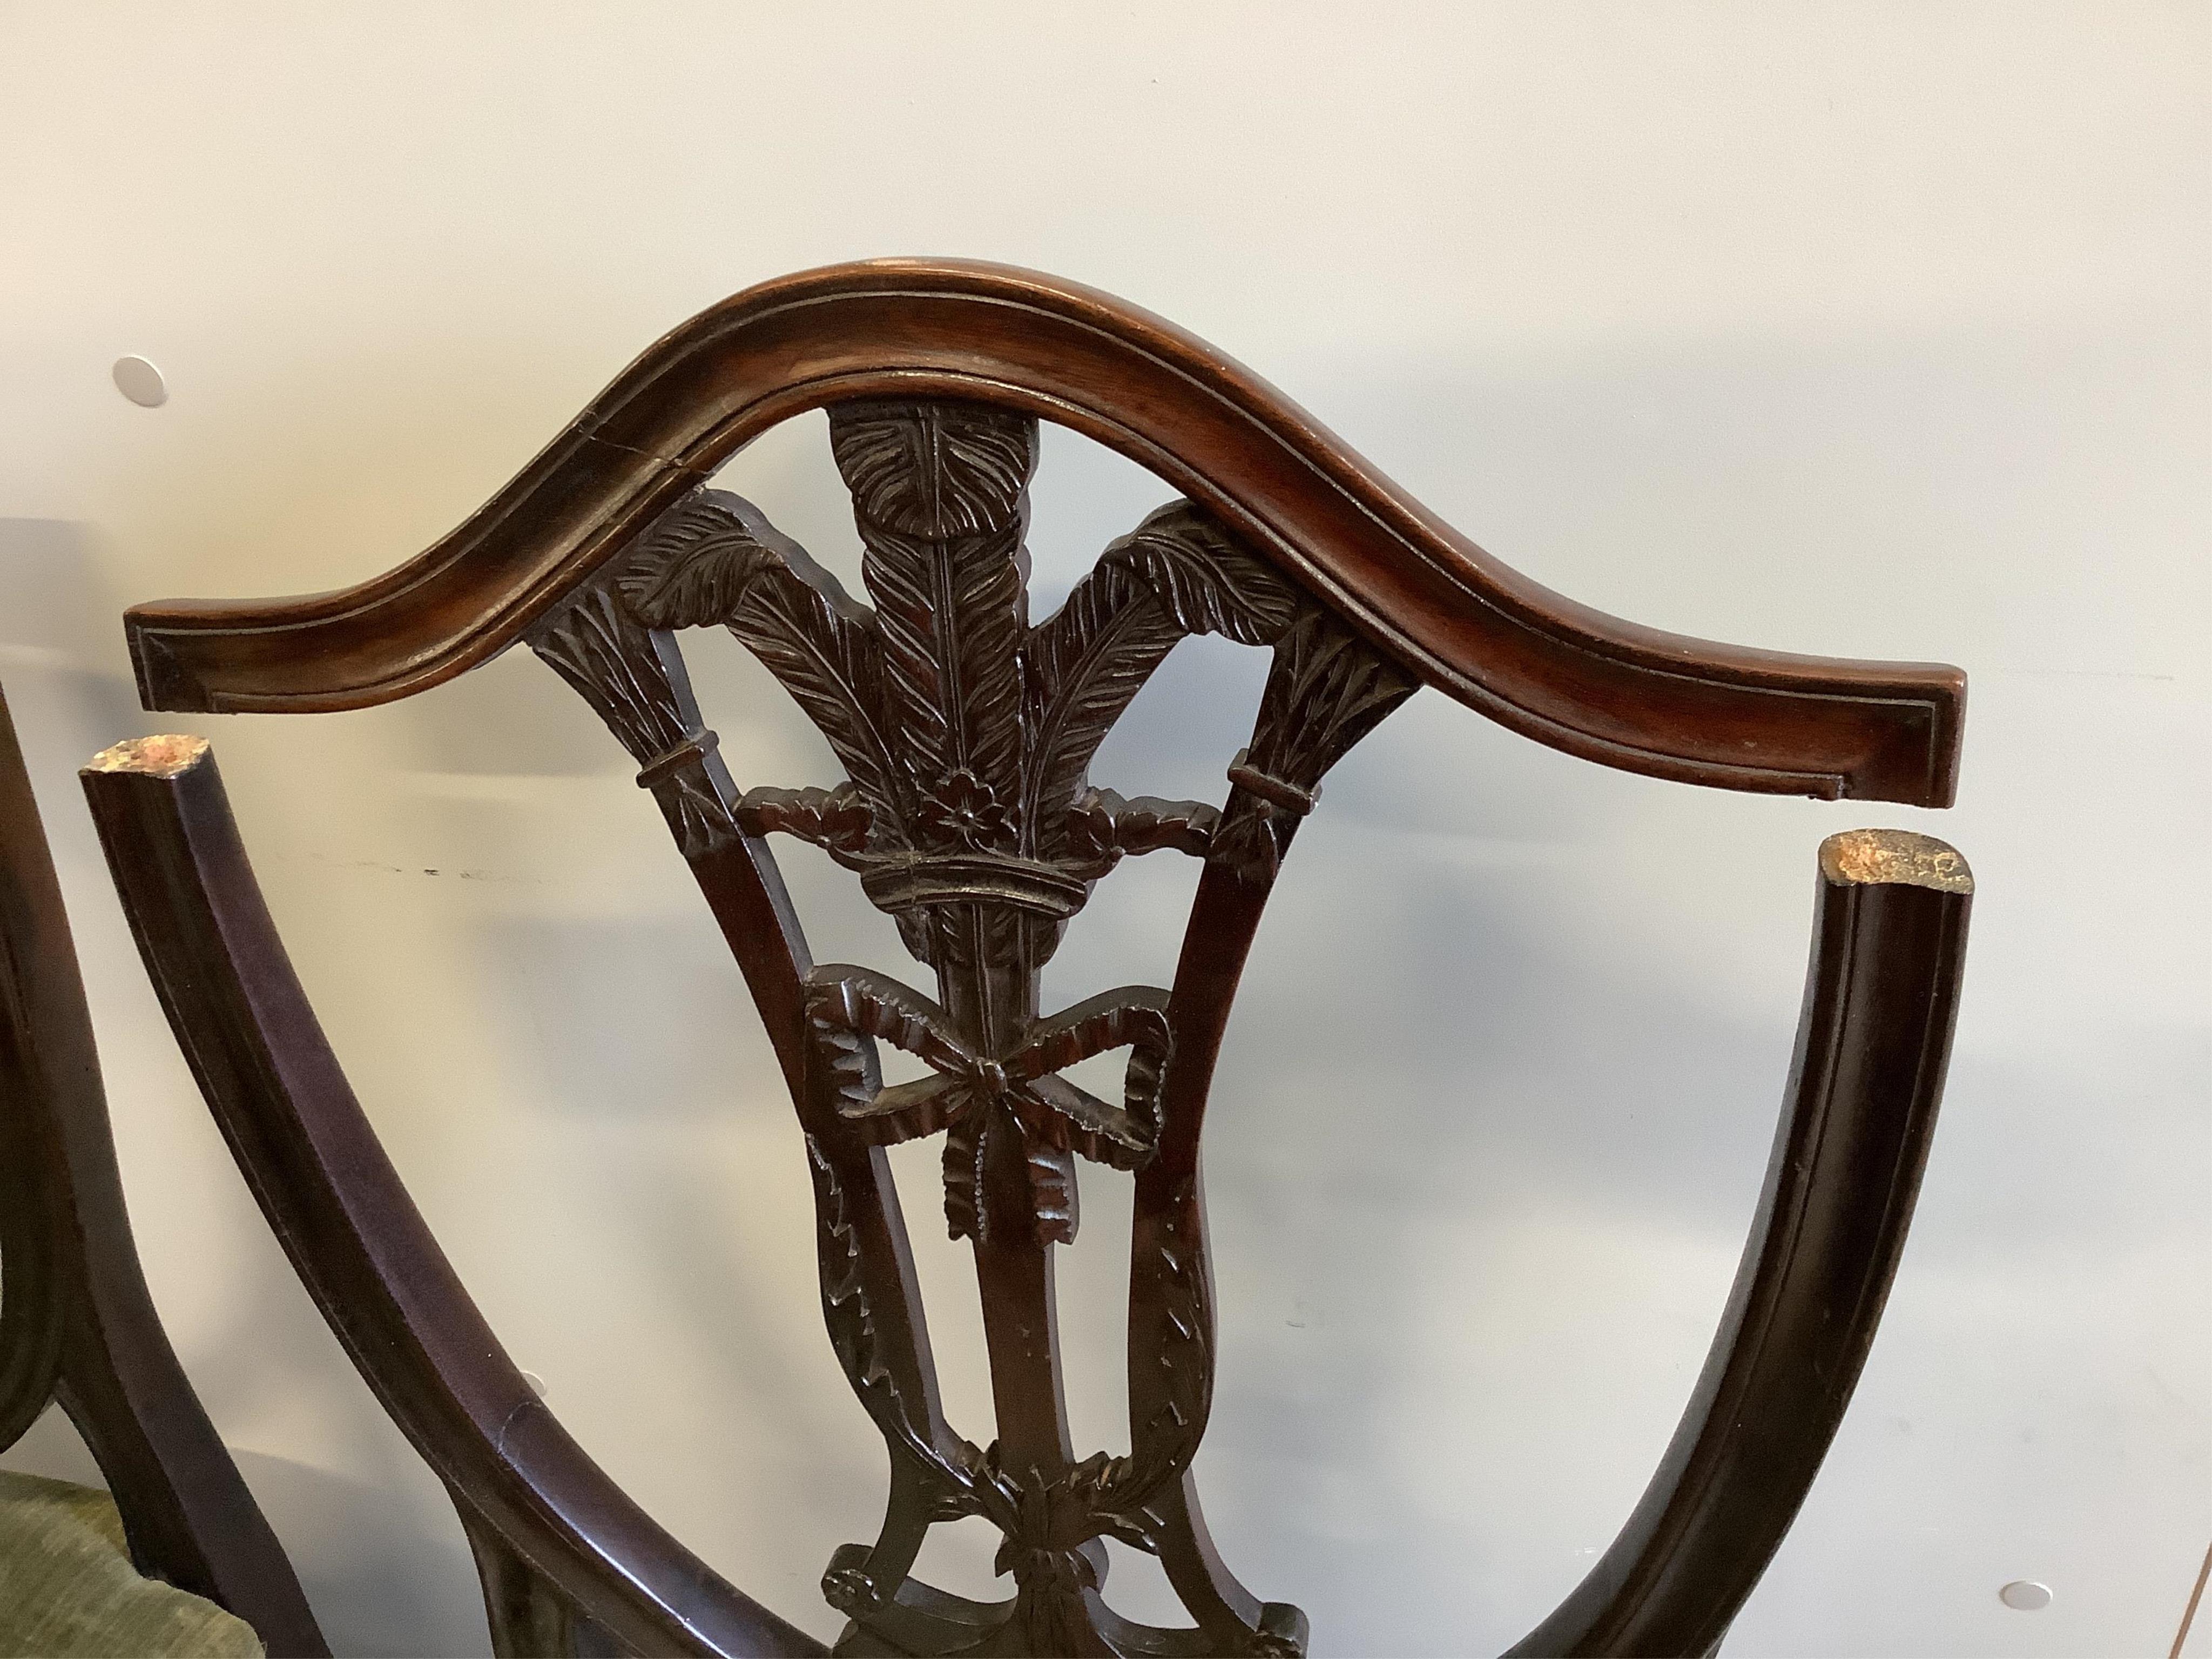 Two Hepplewhite period mahogany dining chairs, a 19th century Sheraton design elbow chair, a pair of side chairs and a further chair (6). Condition - fair (one poor)